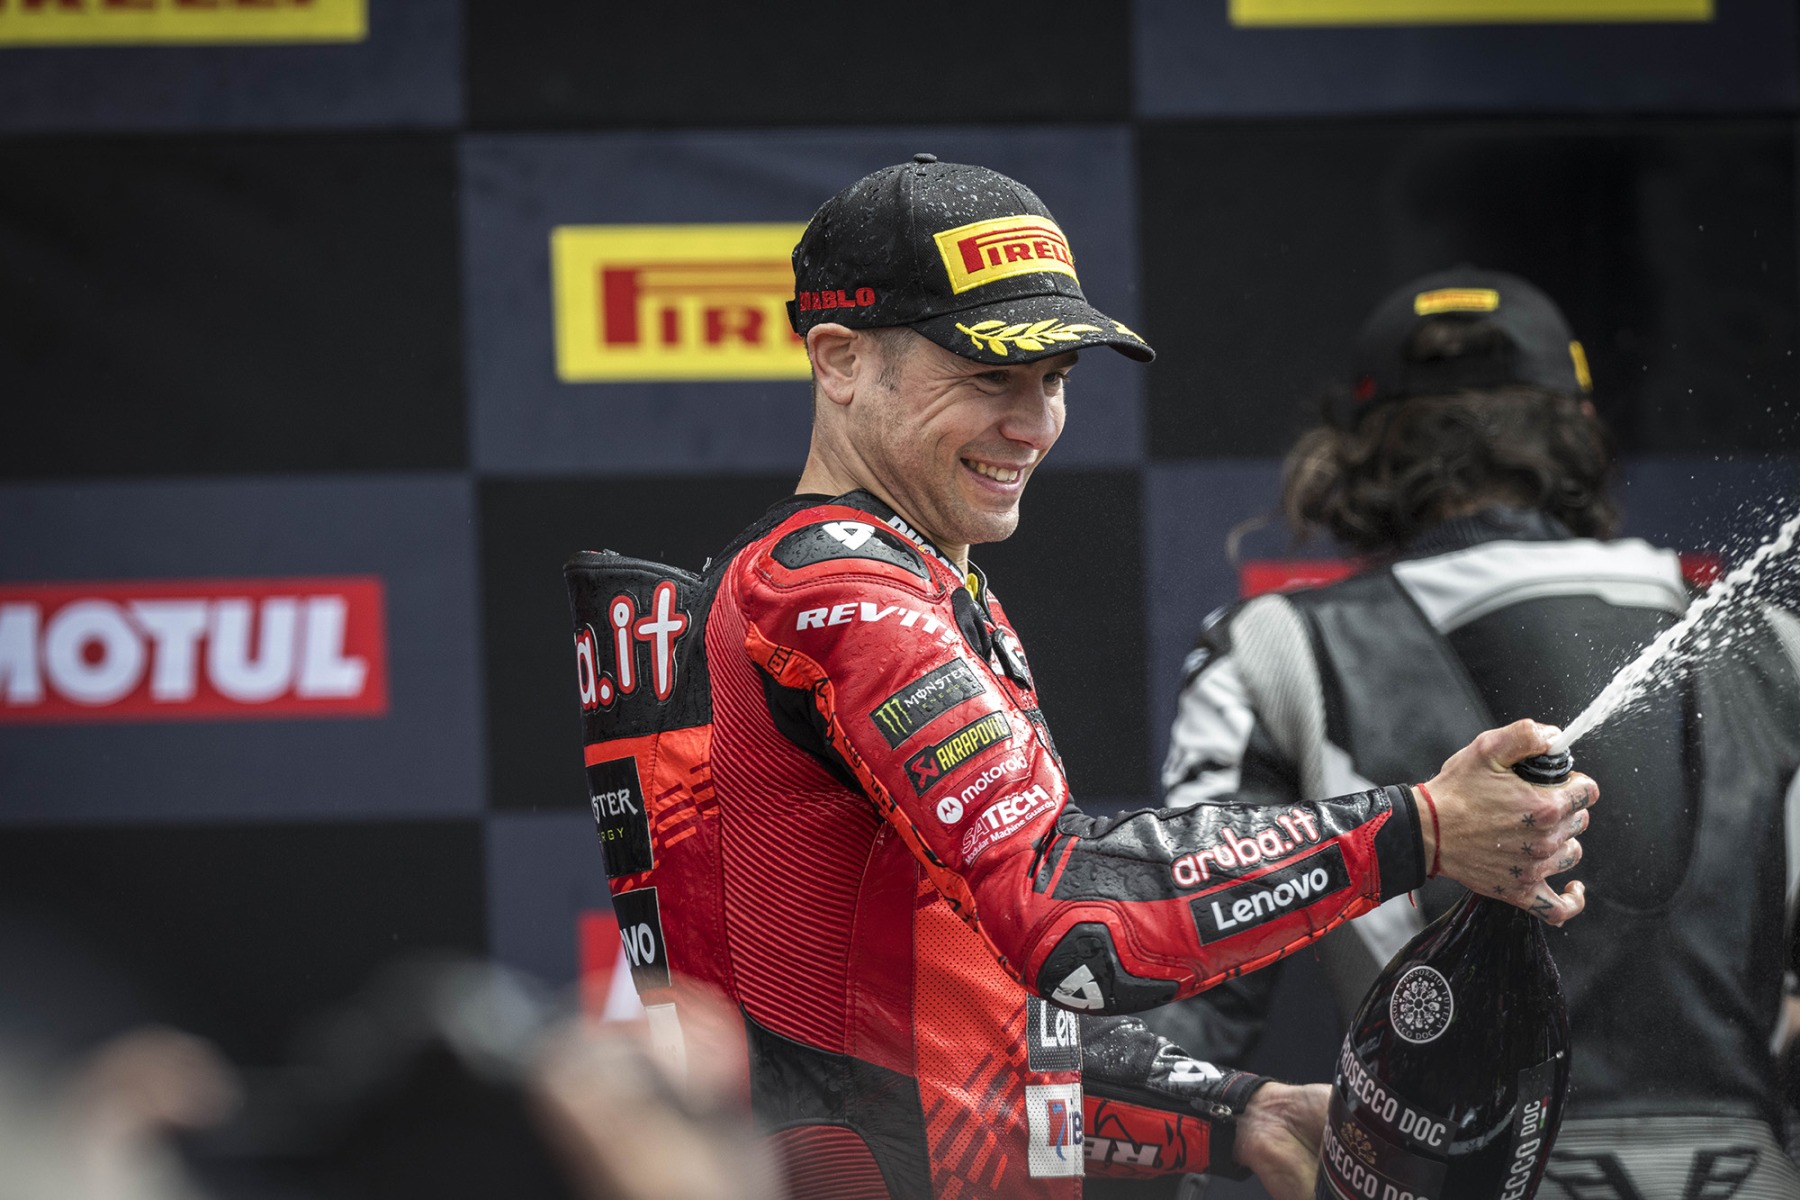 Featured image for “WorldSBK: Business as usual for Bautista as he completes a Ducati 1-2 at Assen”